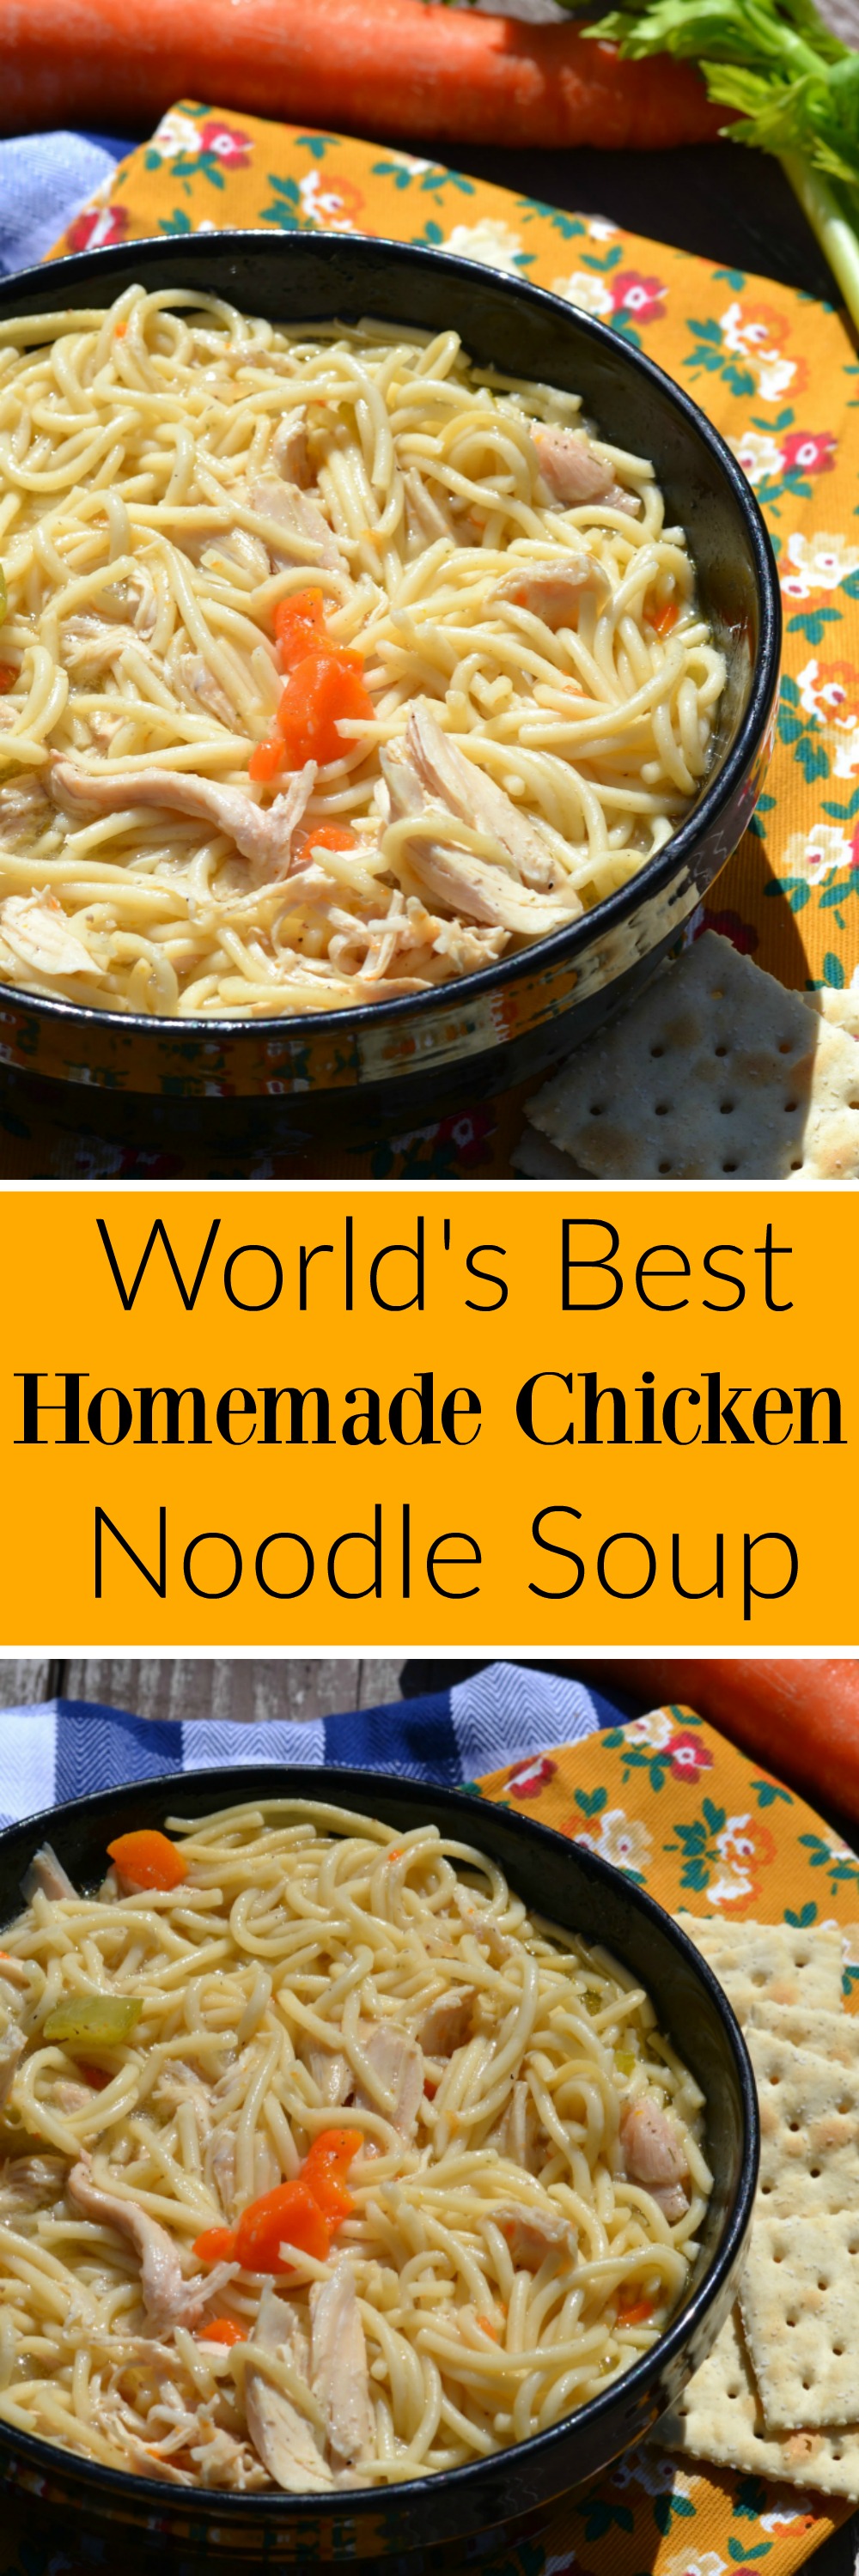 The World's Best Chicken Noodle Soup